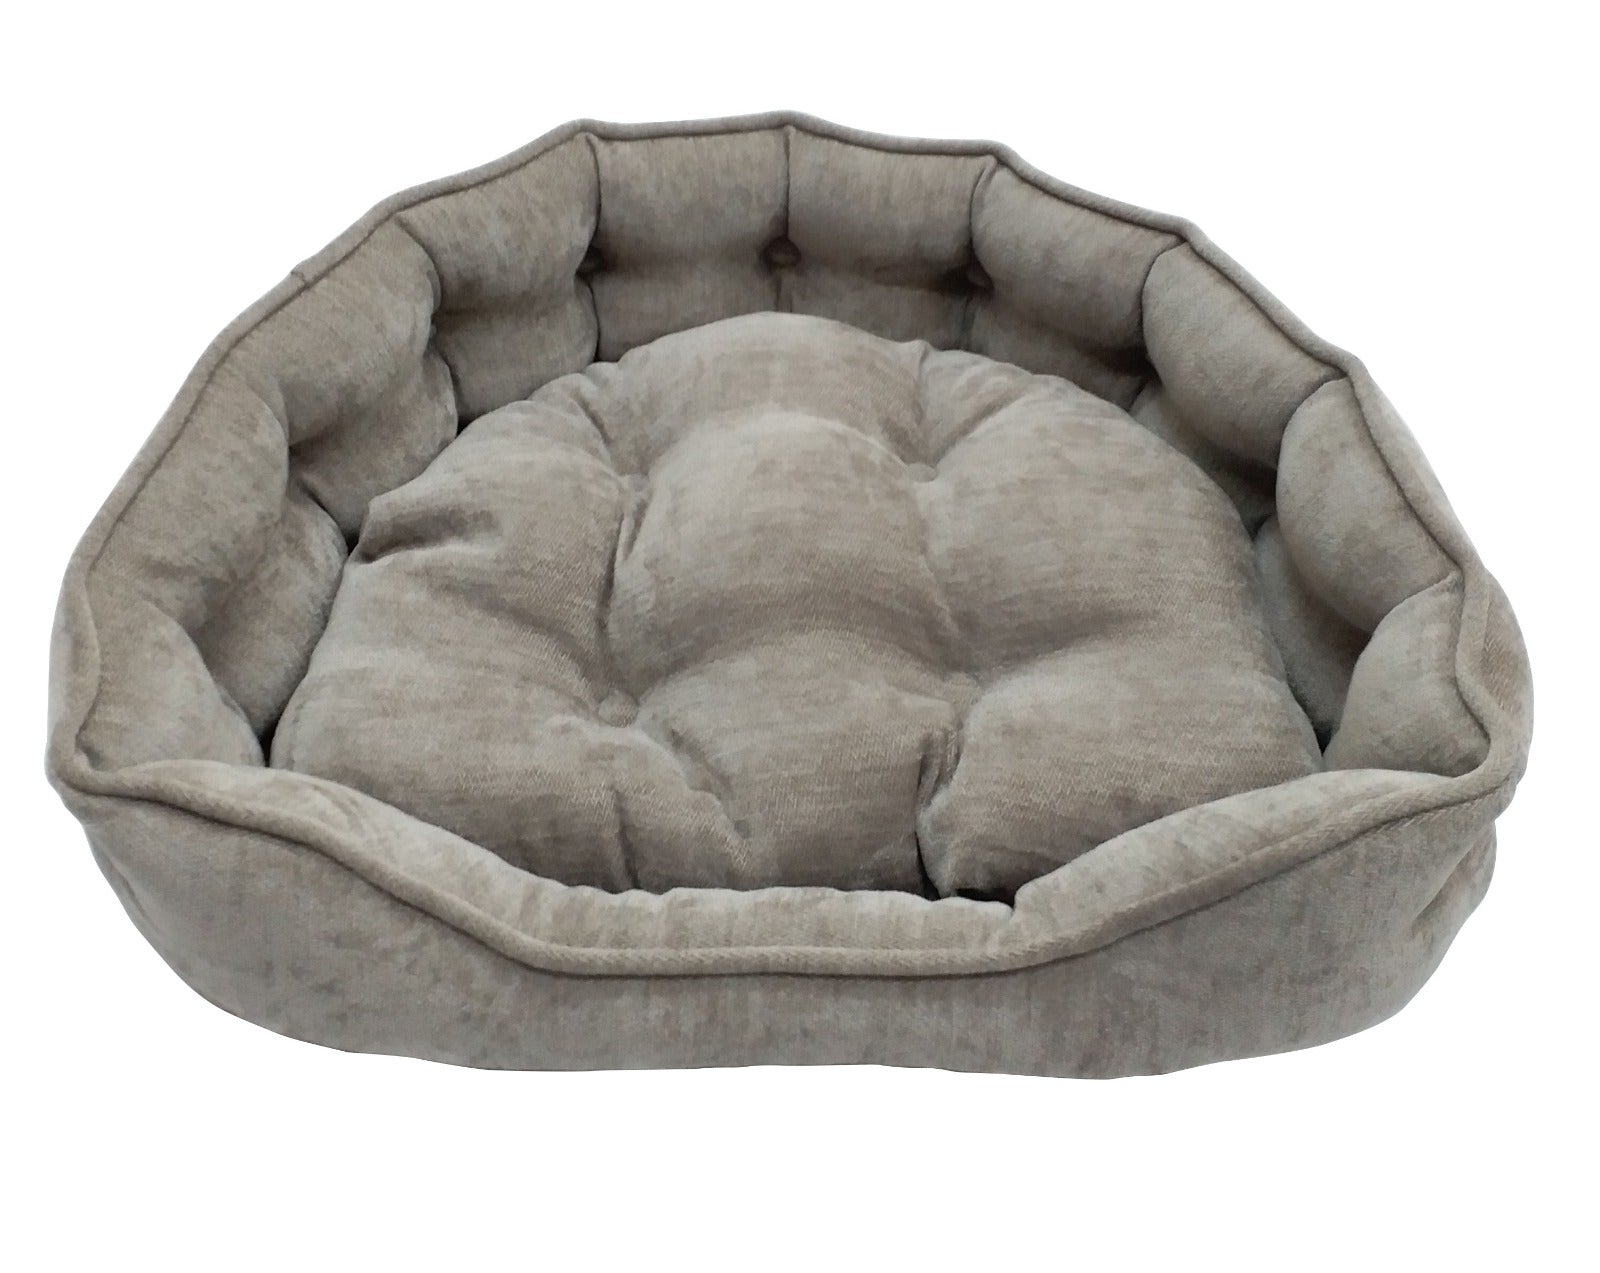 One for Pets - Pamola Snuggle Bed - Silver Grey - 25" x 21" x 6" (L)